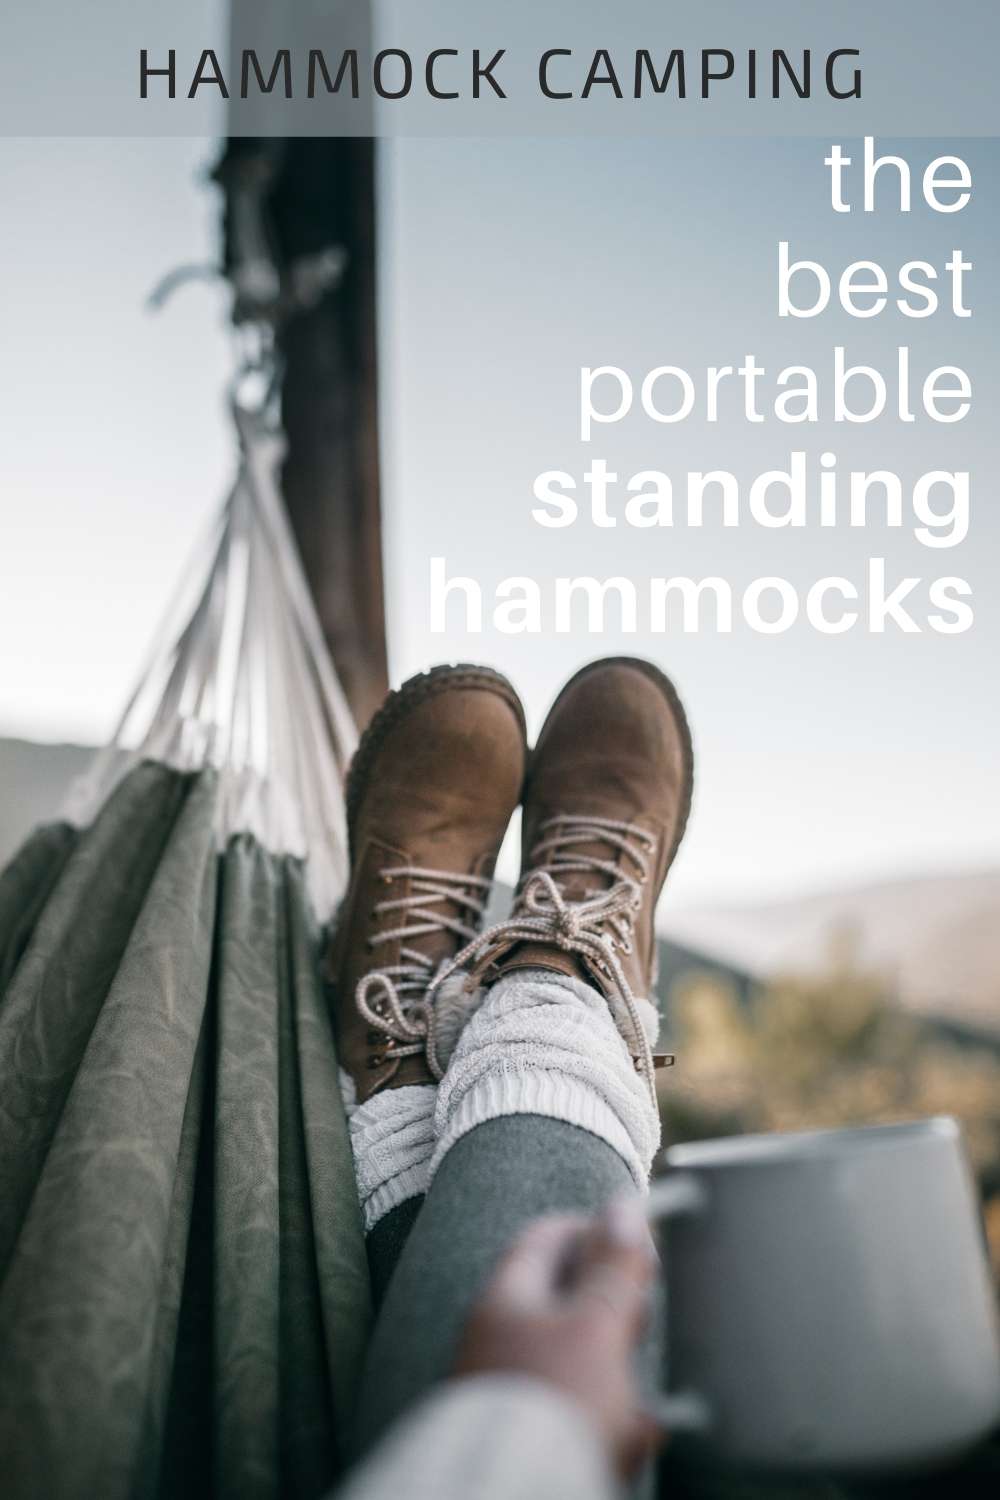 Portable Hammock Stands for Van Life and Hammock Camping on Pinterest